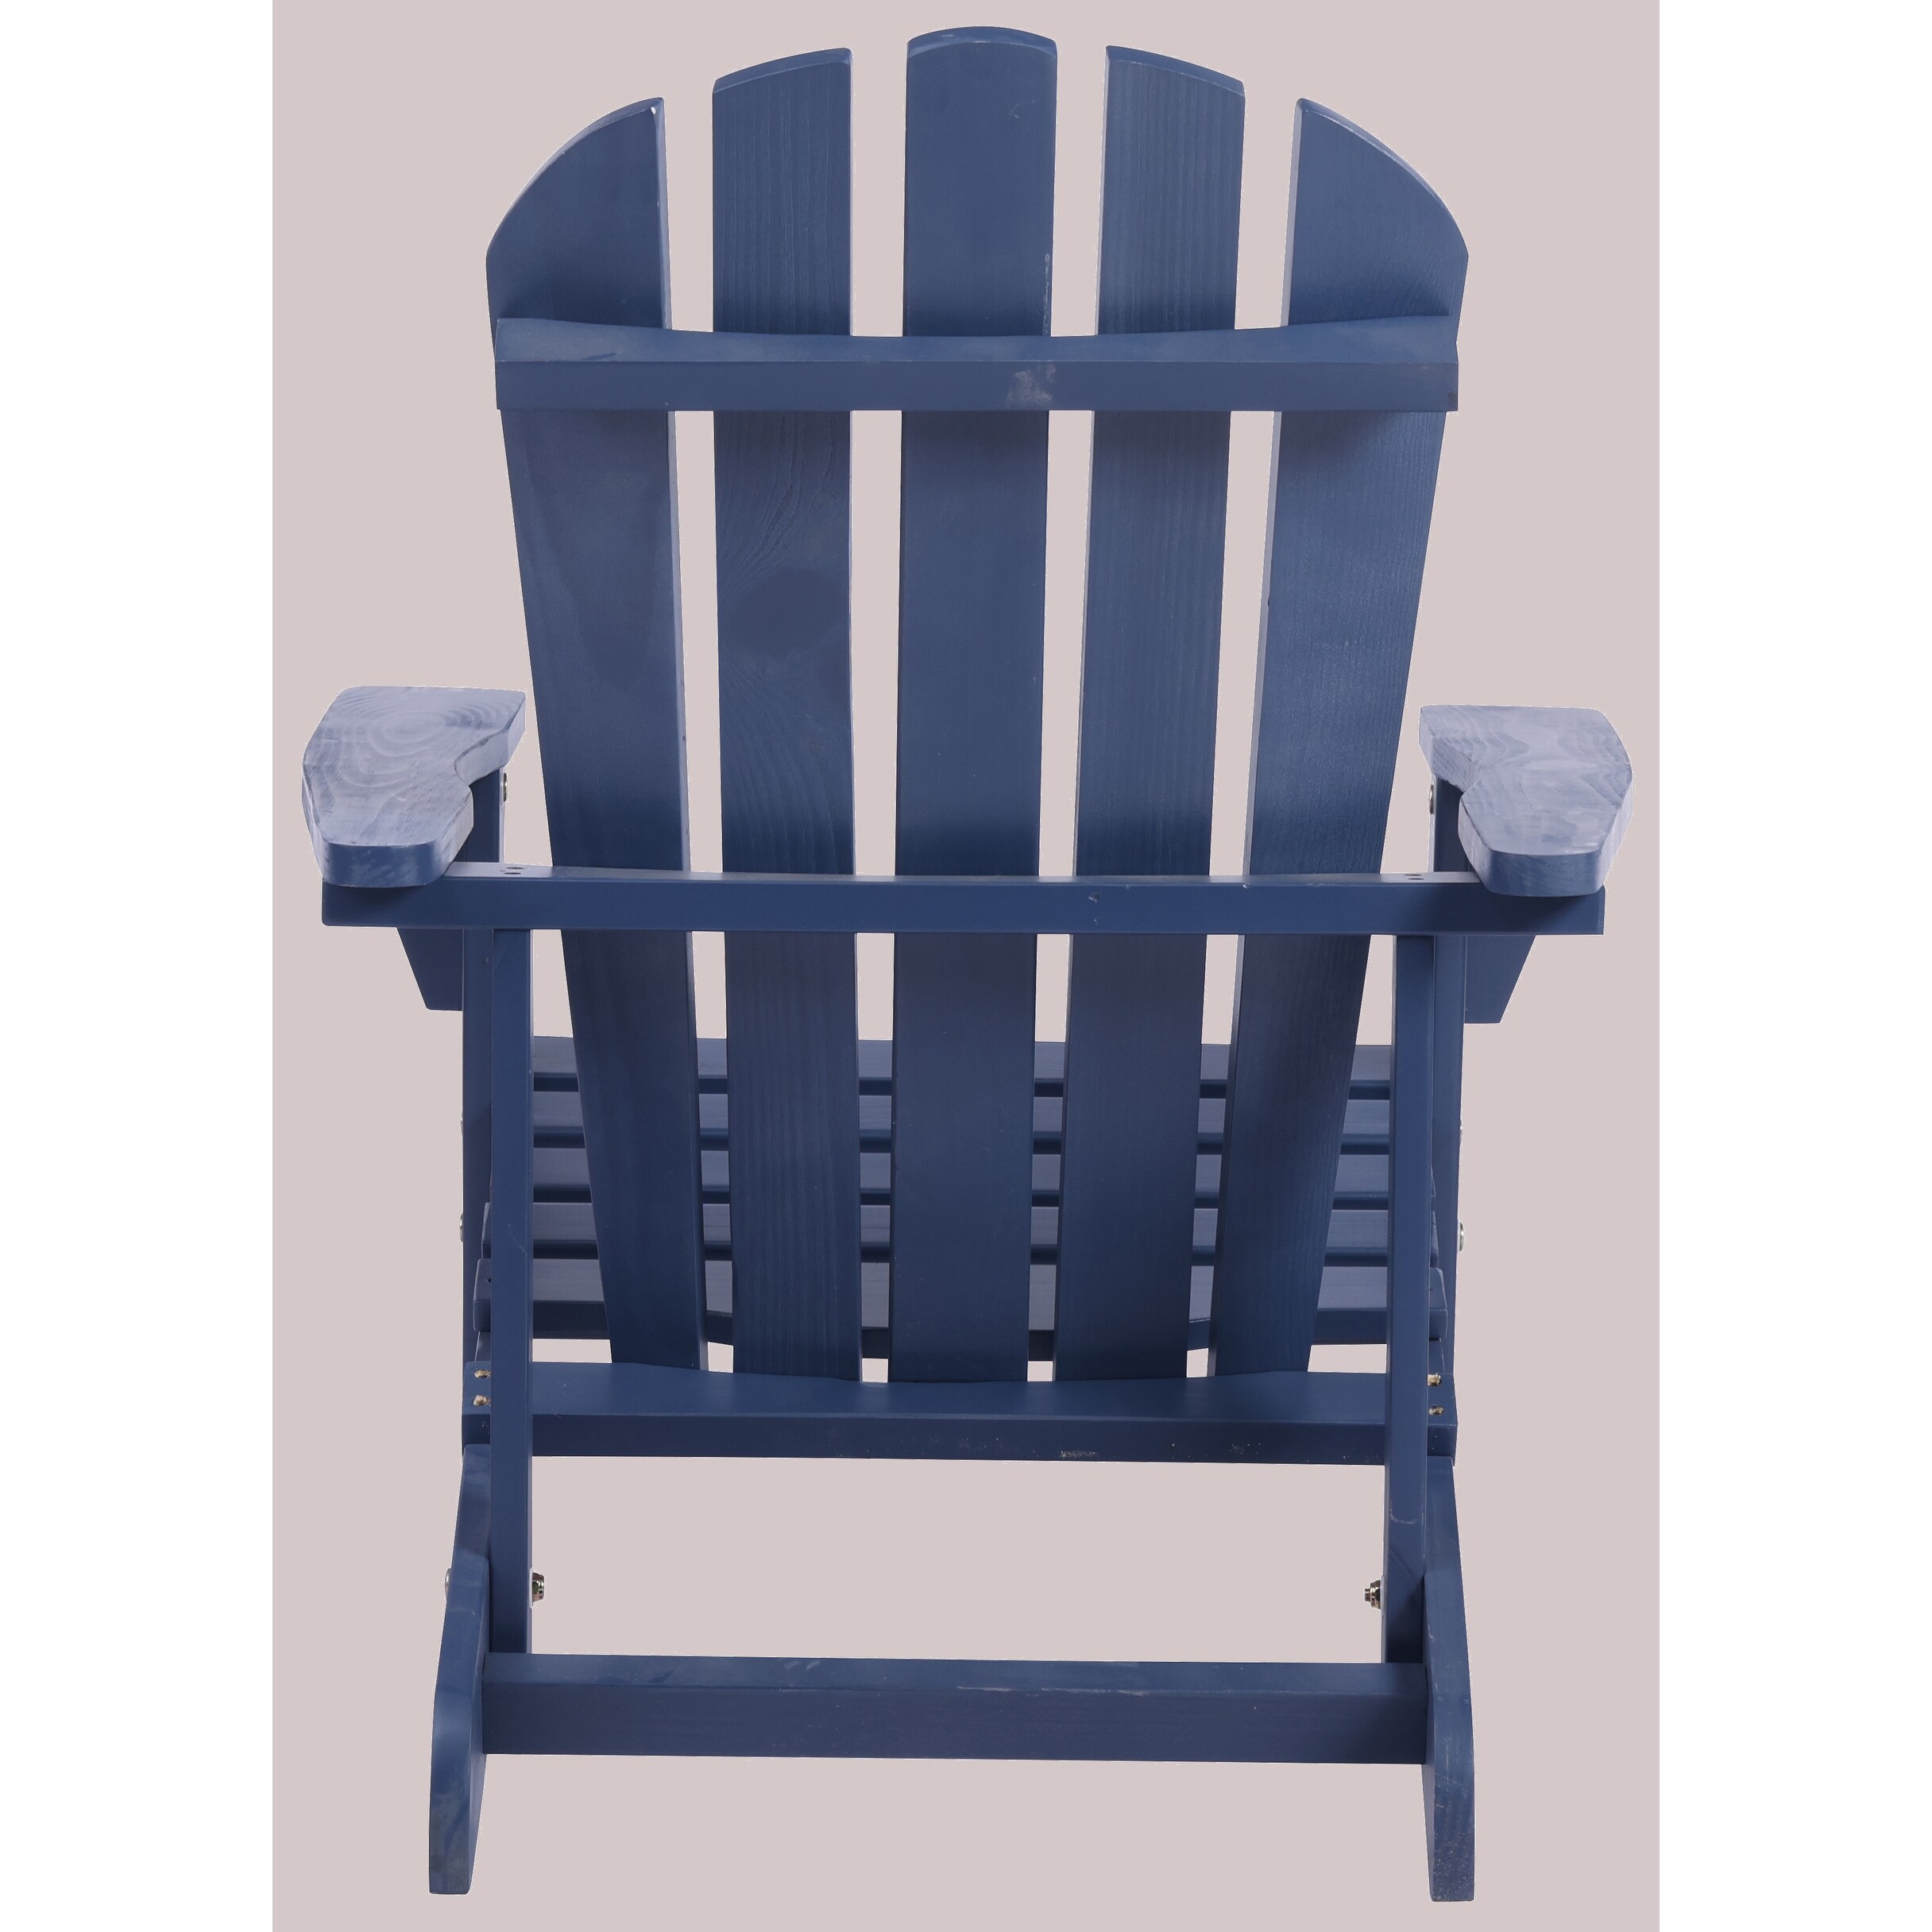 Solid Wood Outdoor Patio Adirondack Chair